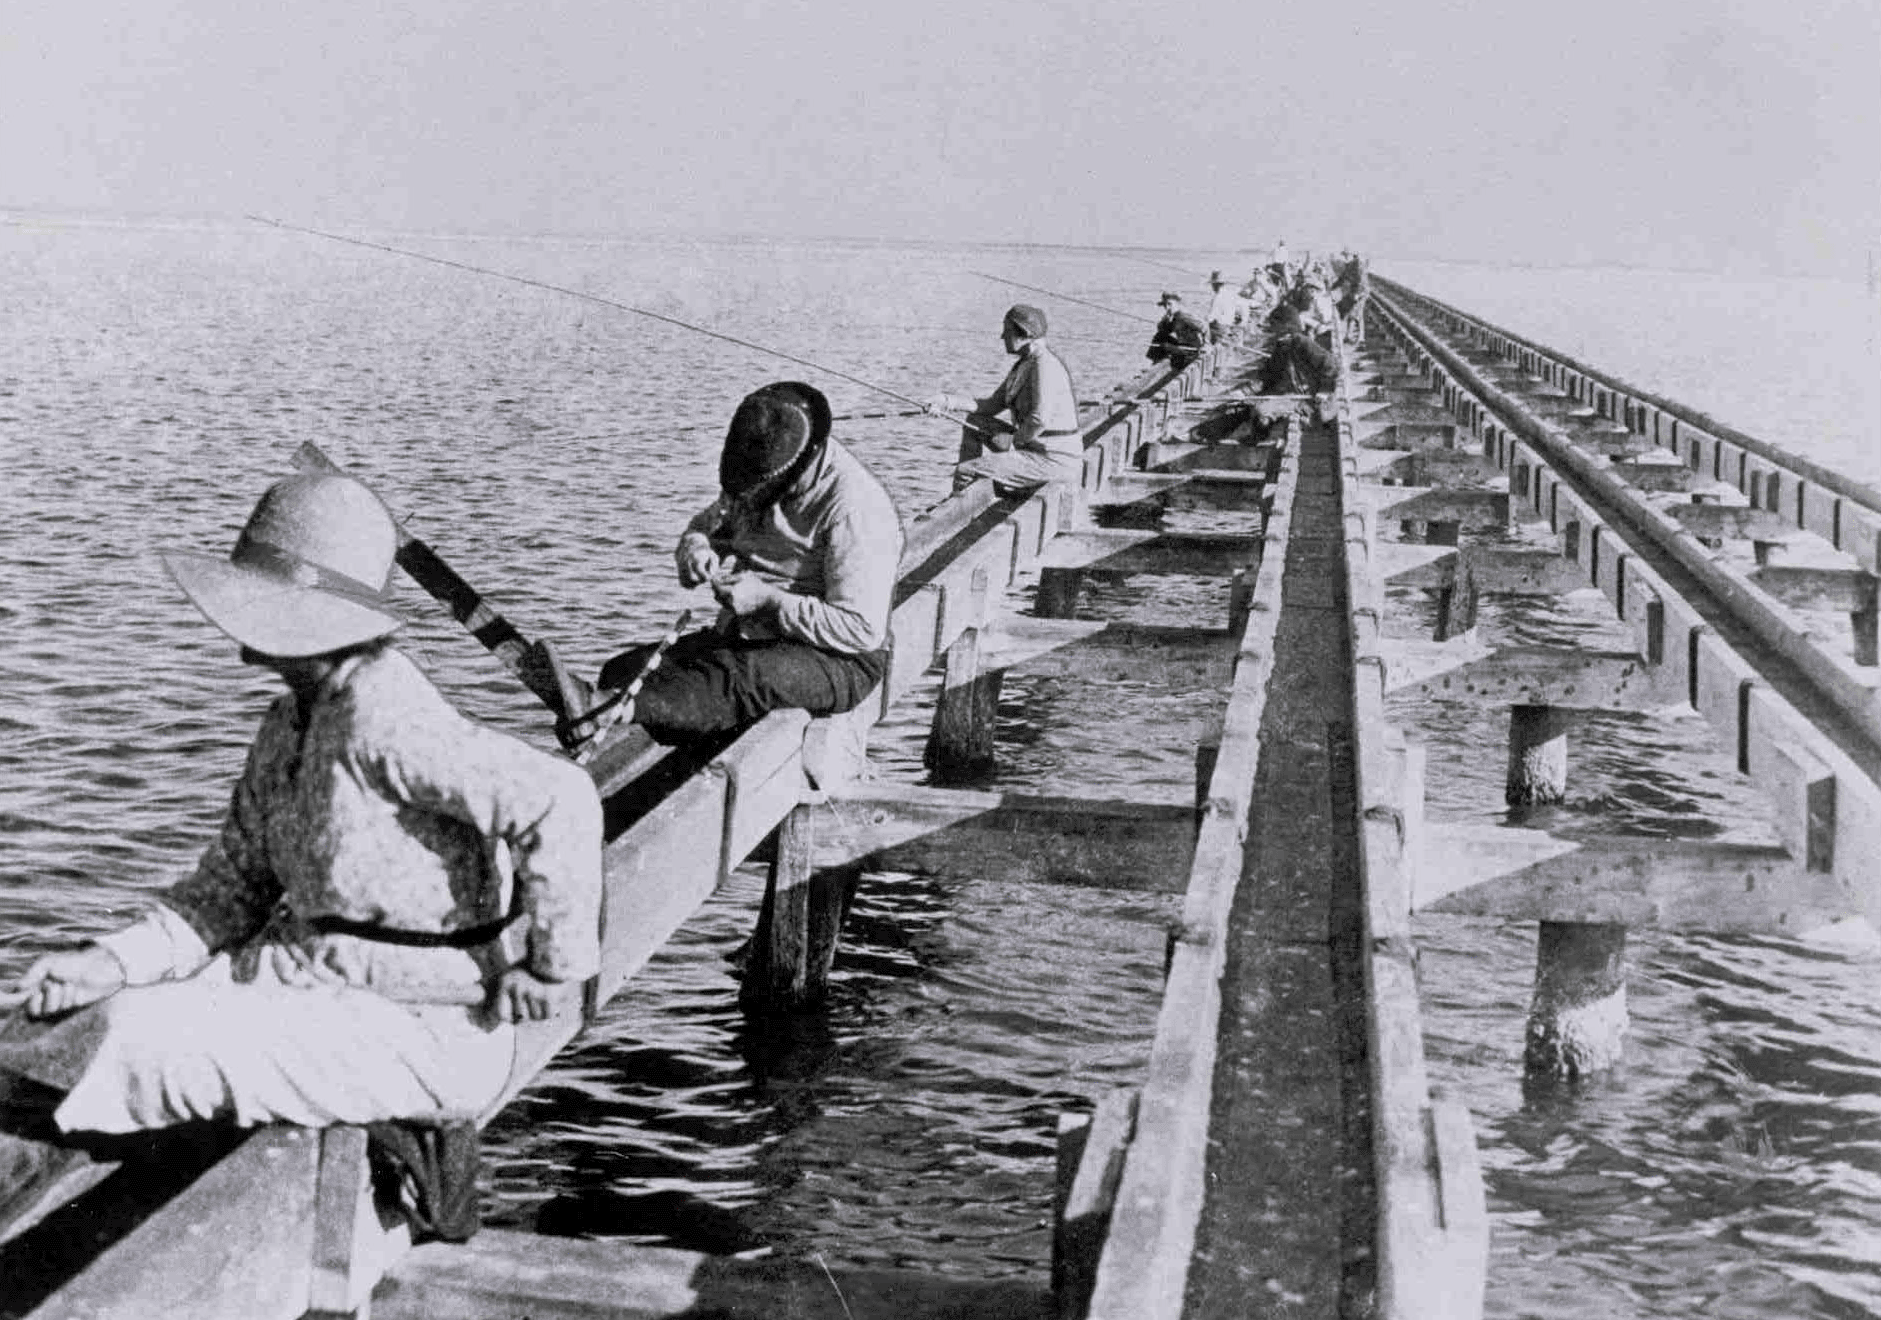 A black and white photo of people fishing off a pier.